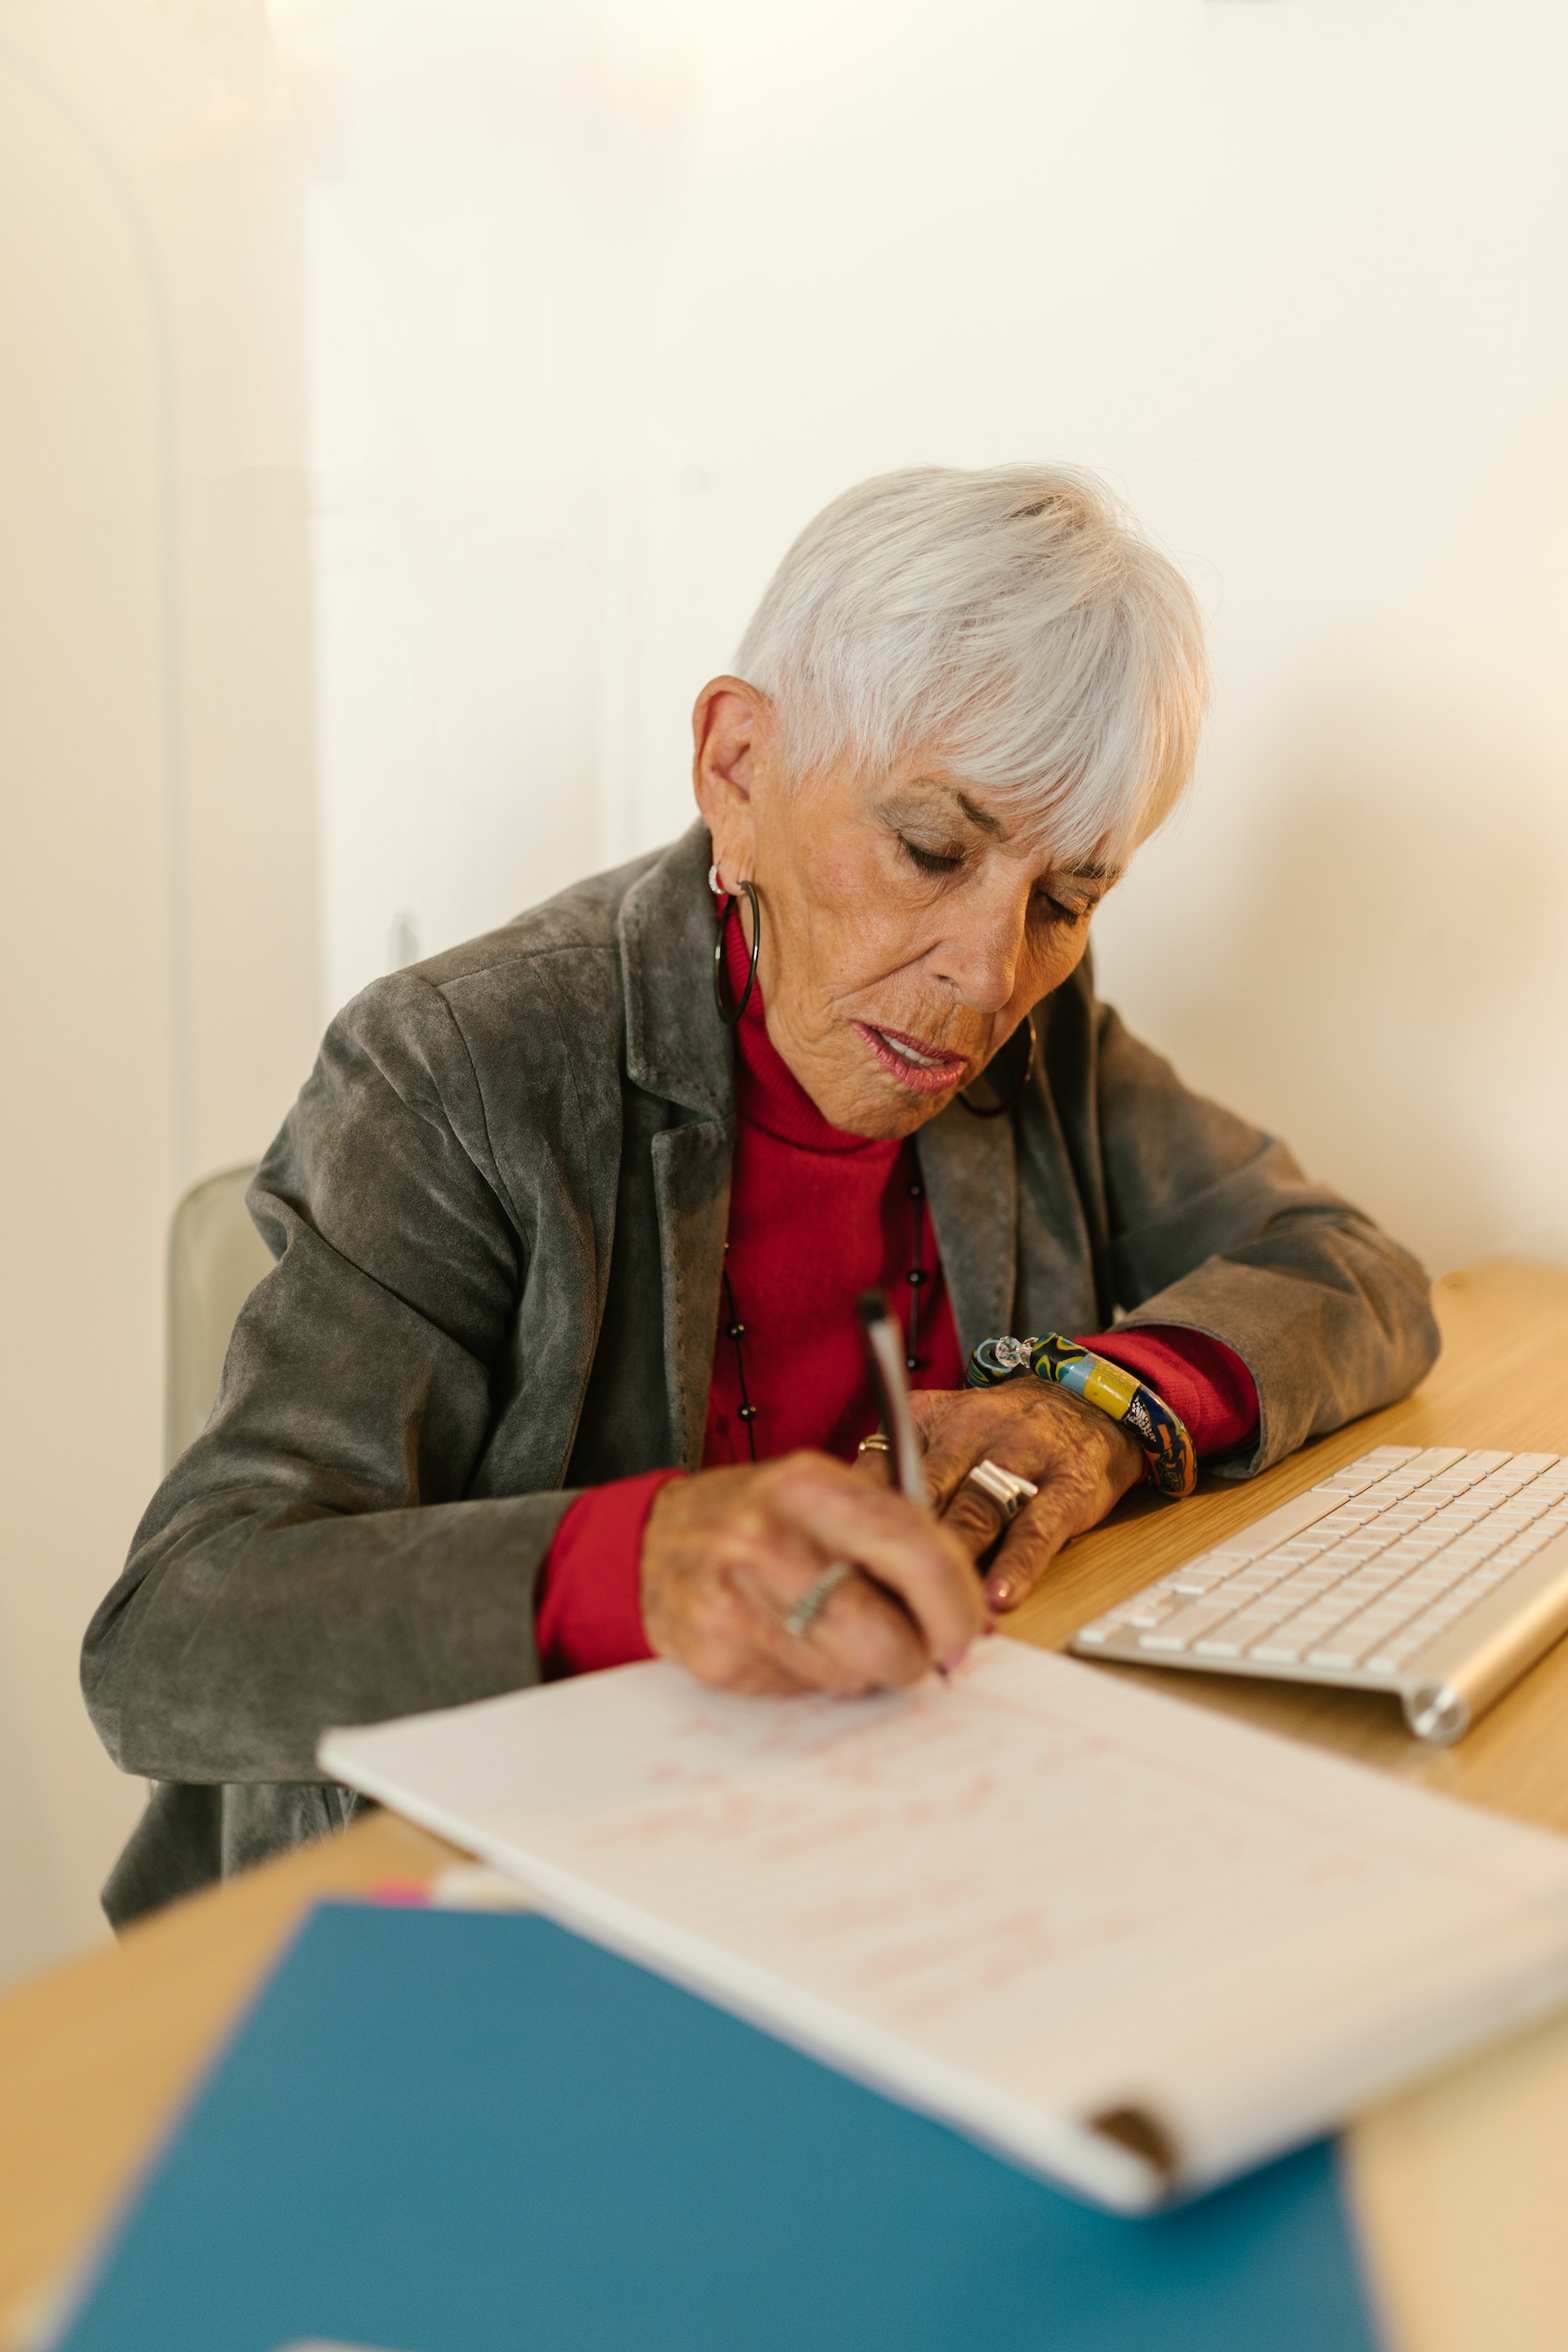 An older woman working on a desk | Source: Pexels